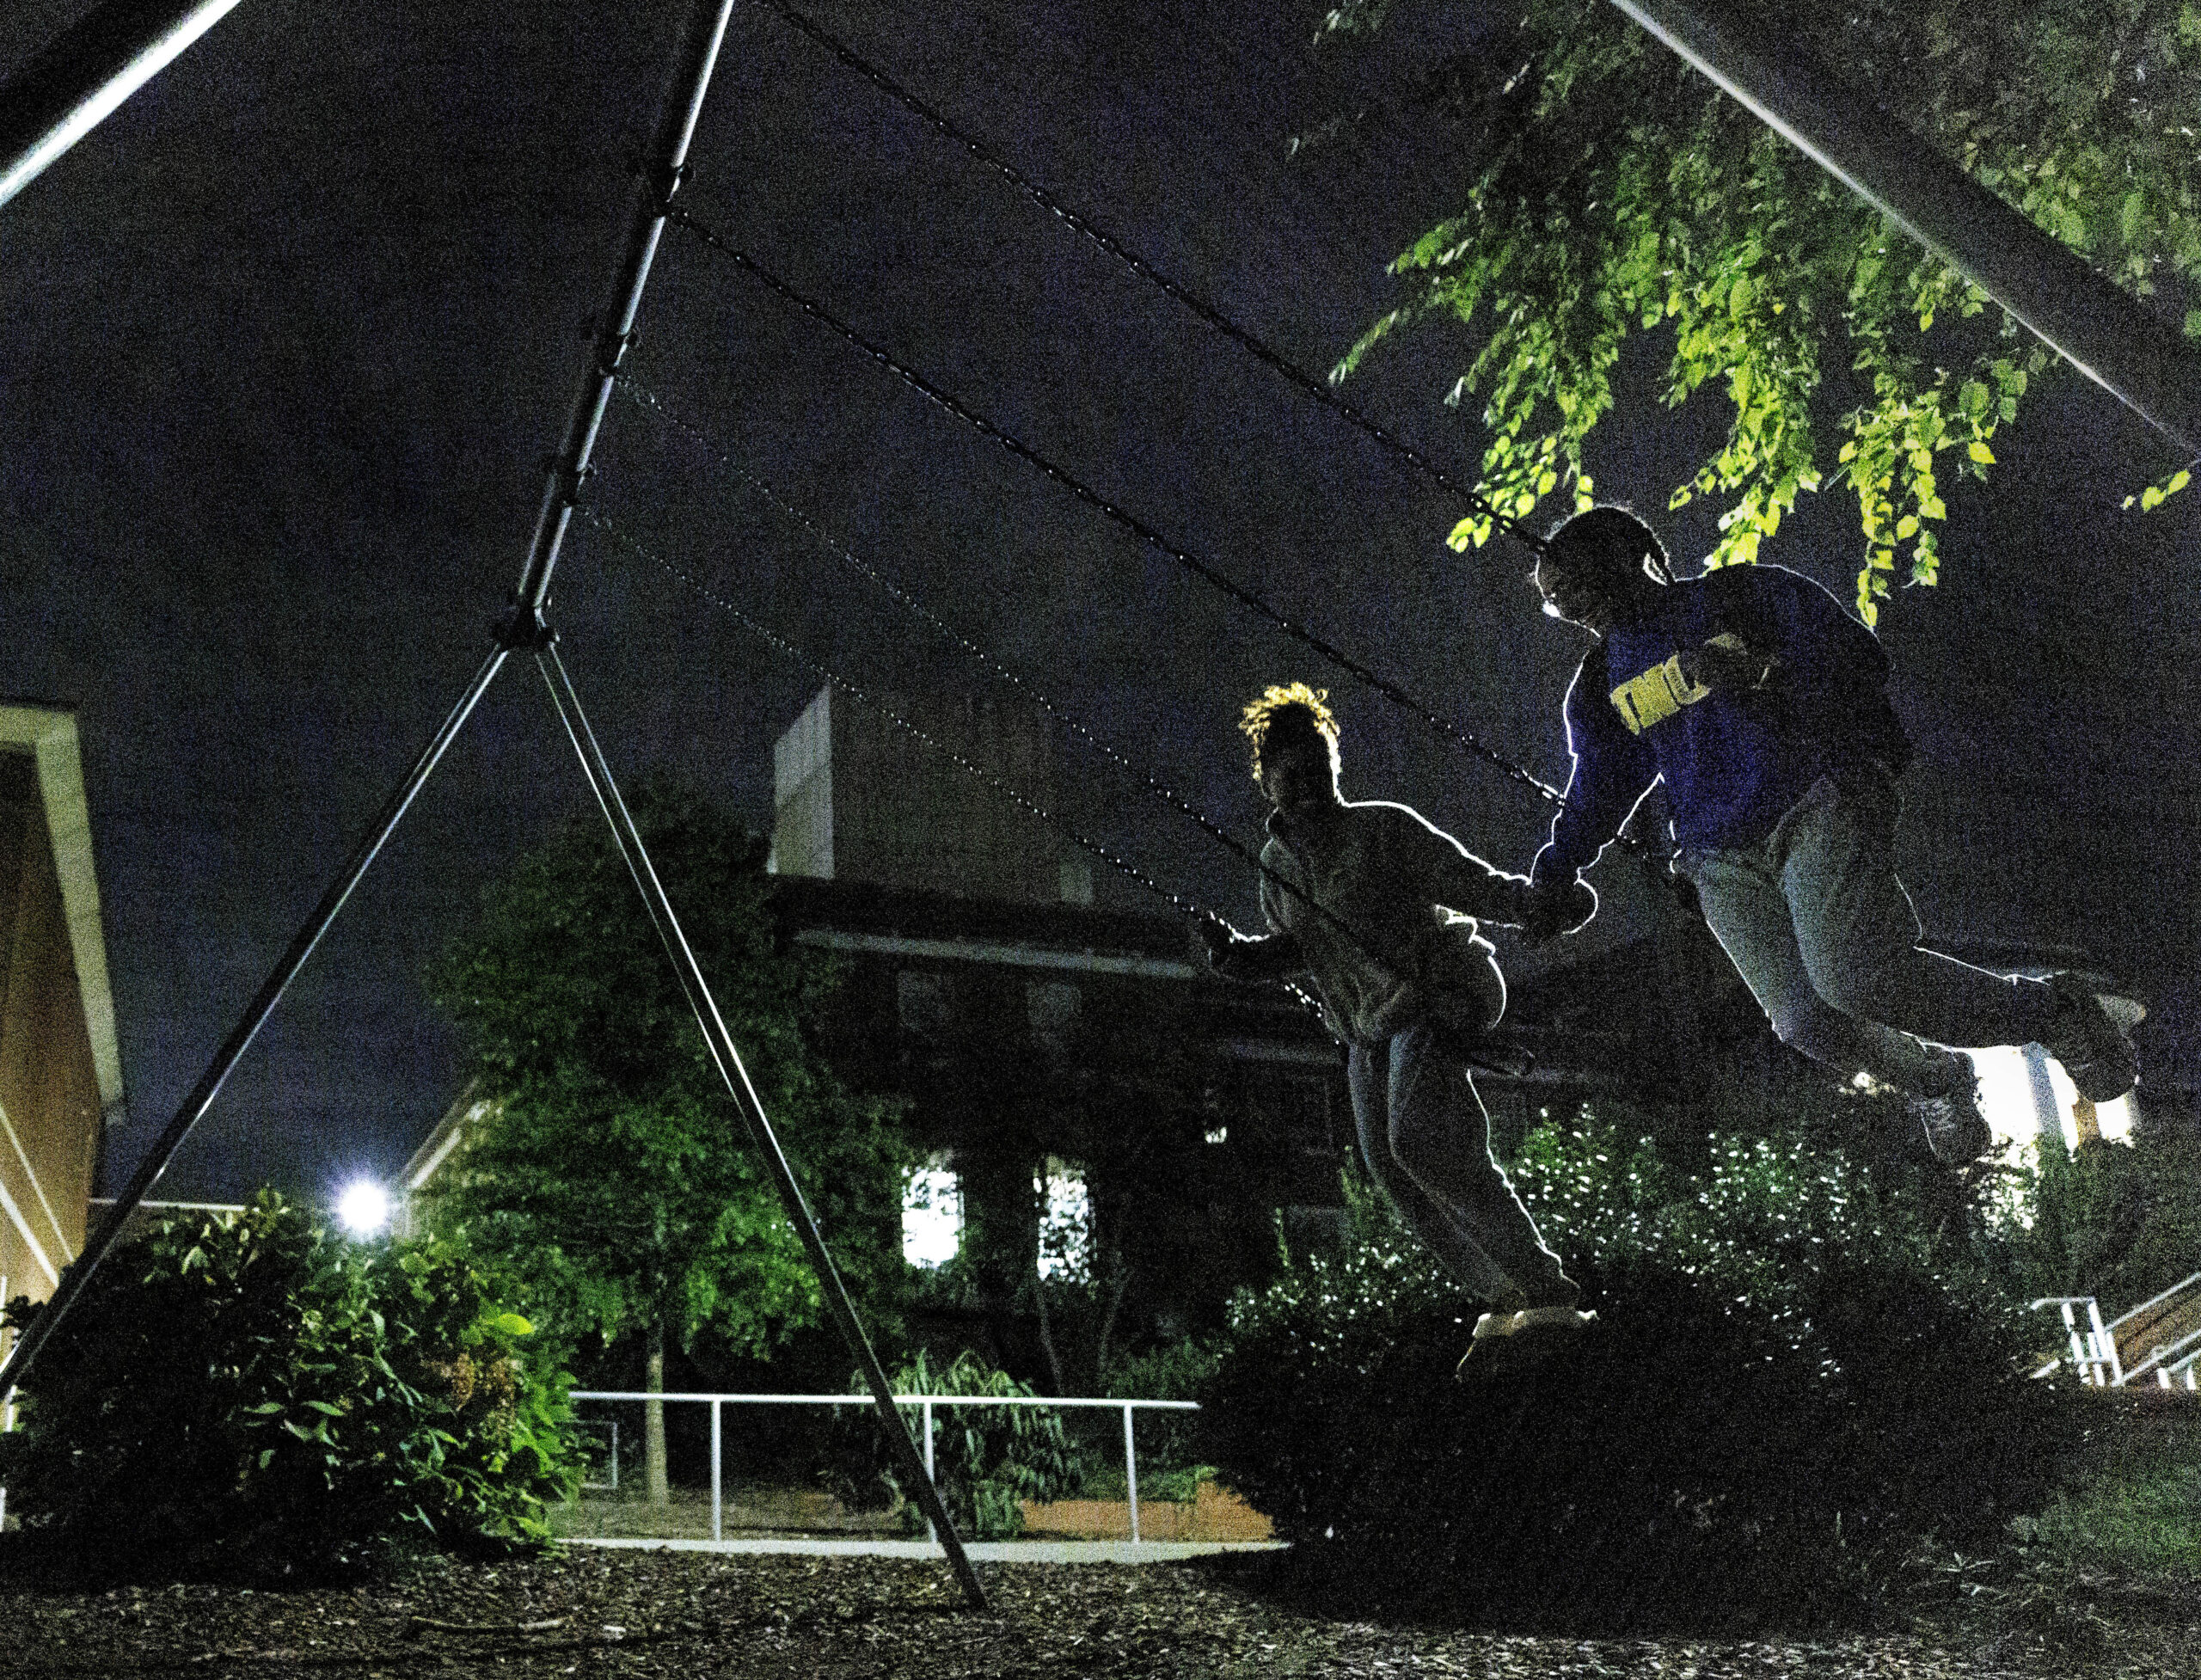 Two UNCG students, hold hands while swinging on a swing set at night.